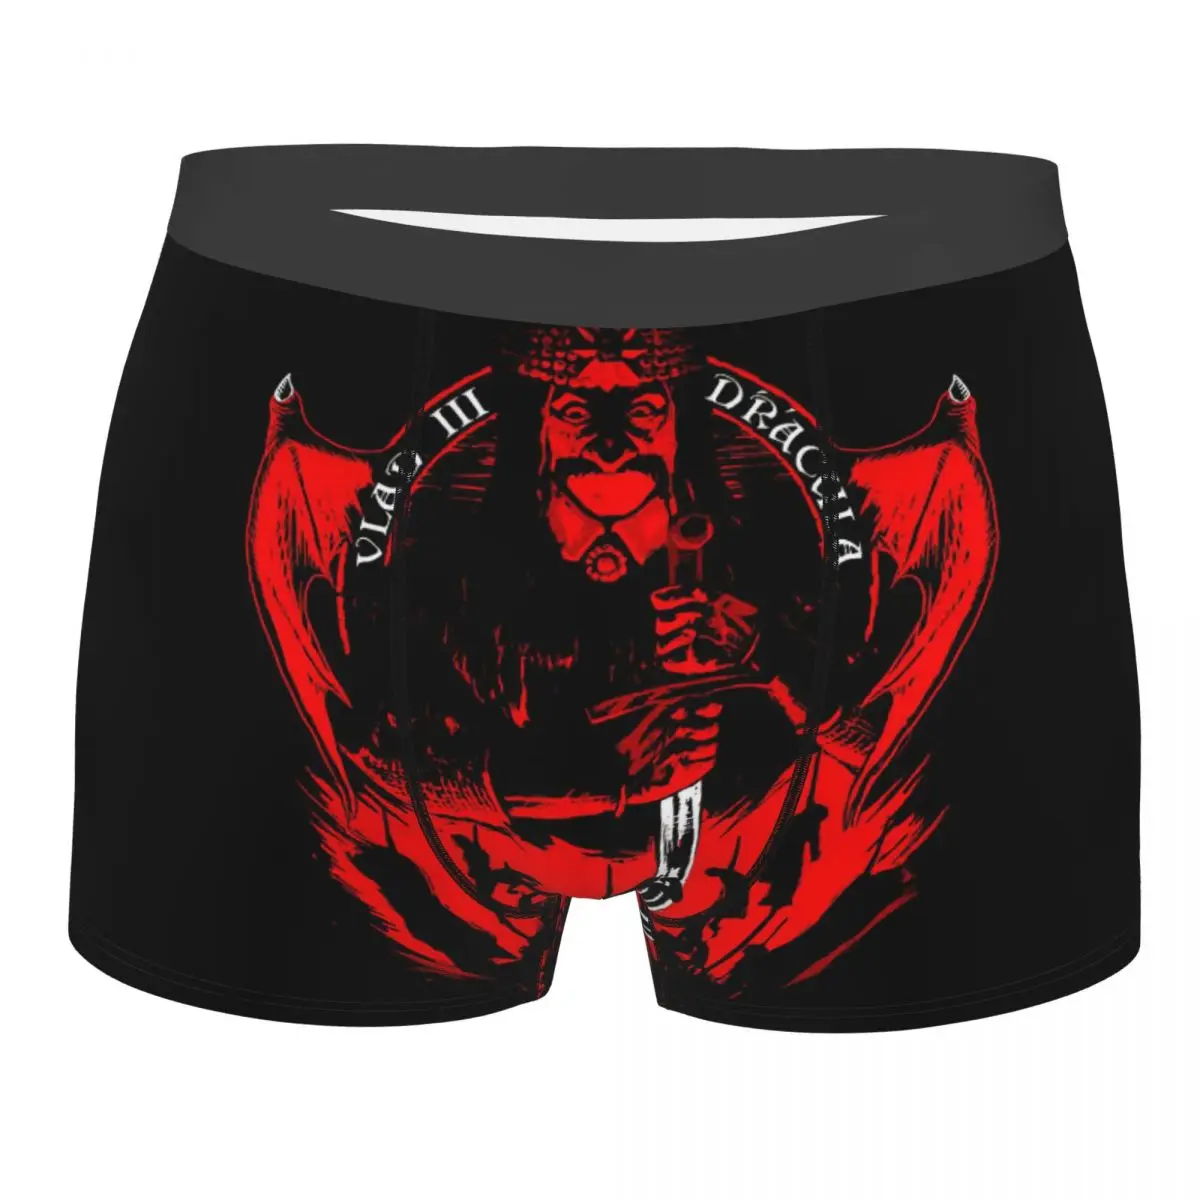 Vlad The Impaler Dracula Man'scosy Boxer Briefs Underwear Highly Breathable High Quality Gift Idea vlad the impaler dracula man scosy boxer briefs underwear highly breathable high quality gift idea